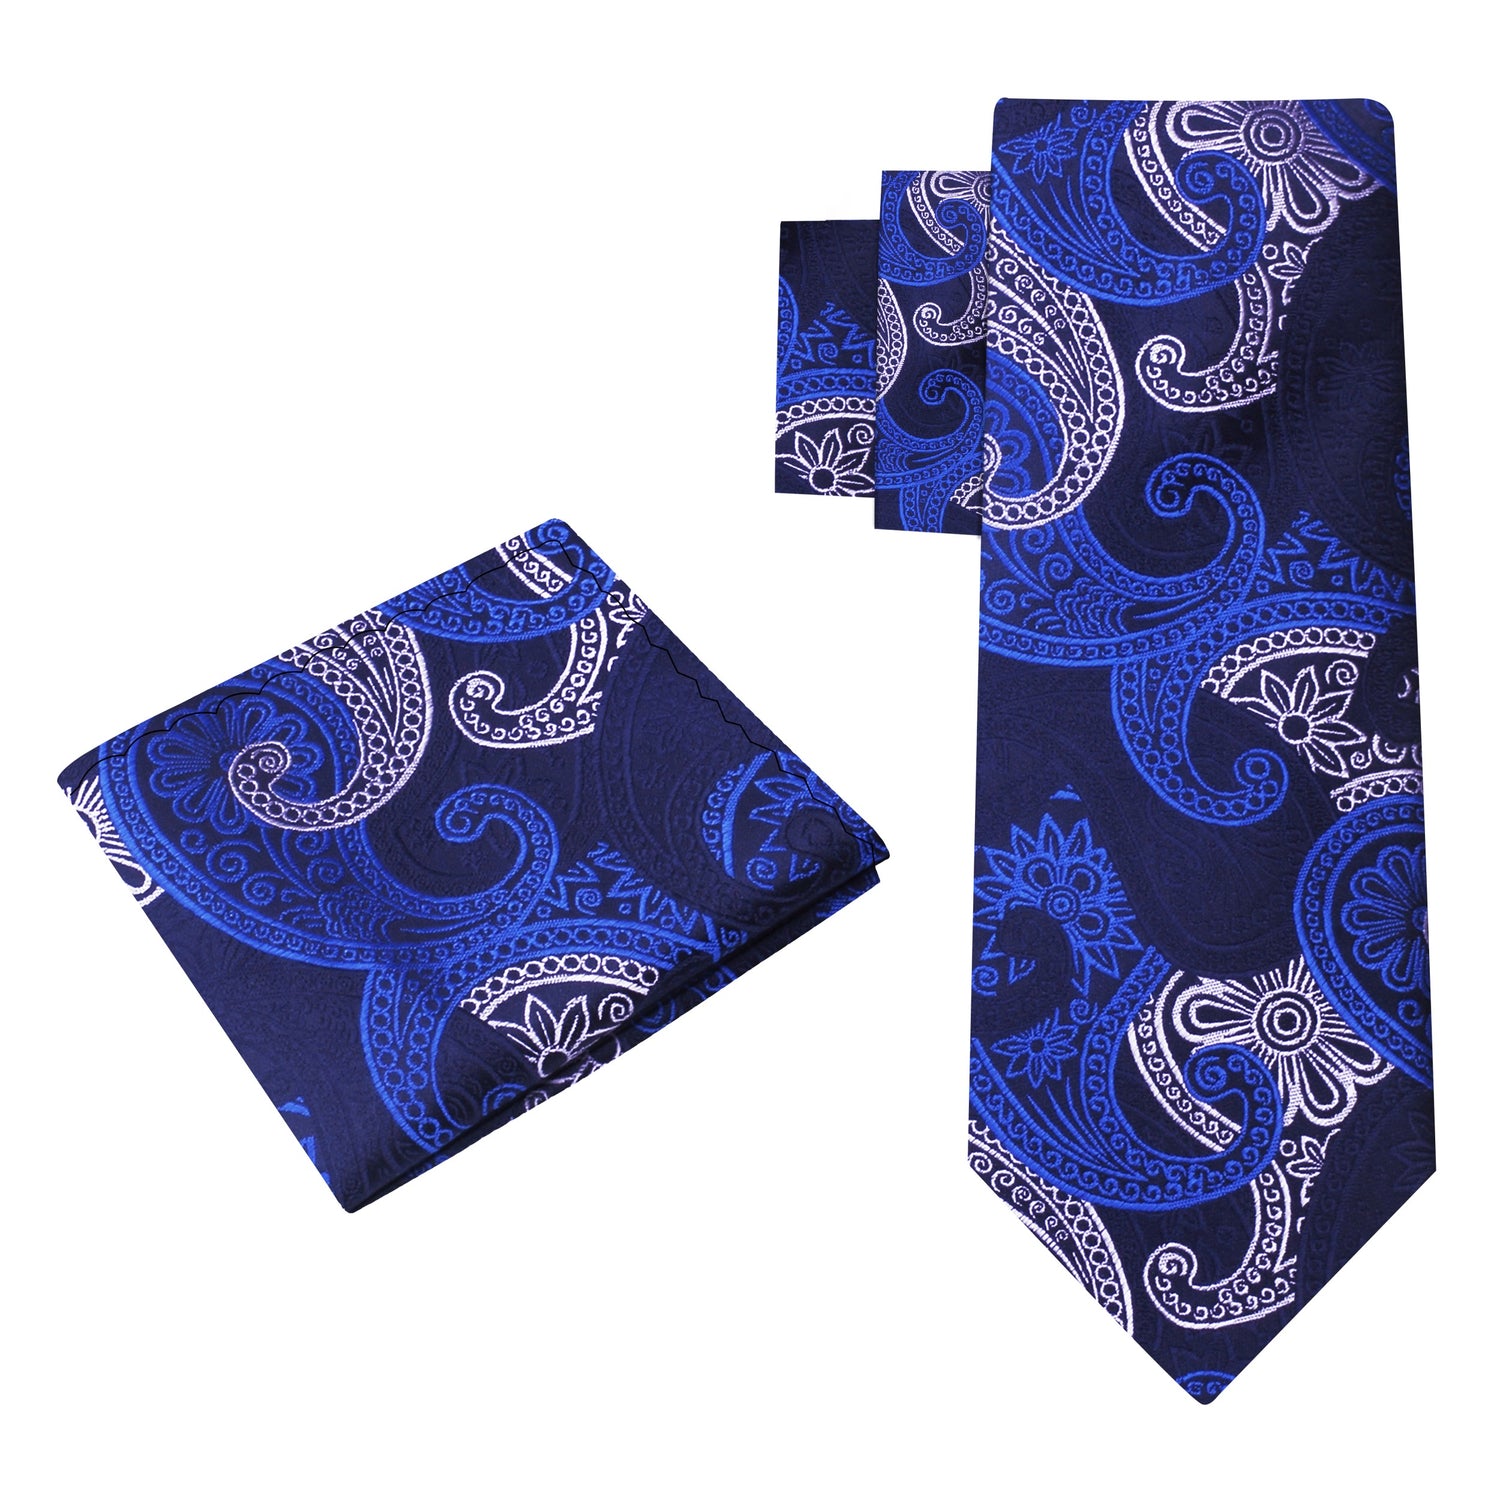 Alt View: Shades of Blue and White Paisley Necktie and Matching Square